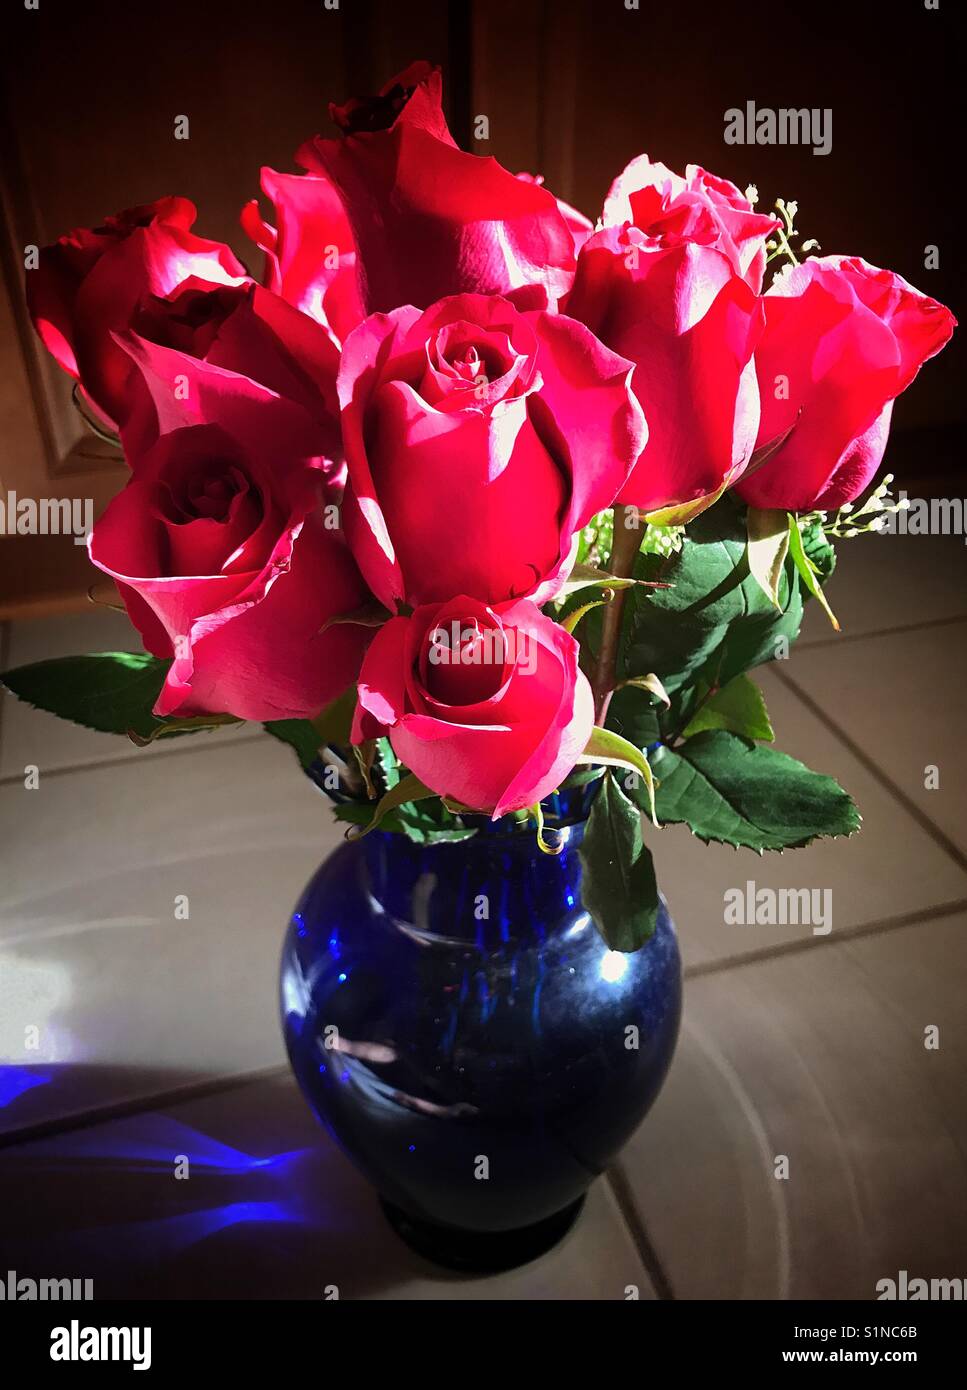 Red roses in a blue glass vase Stock Photo